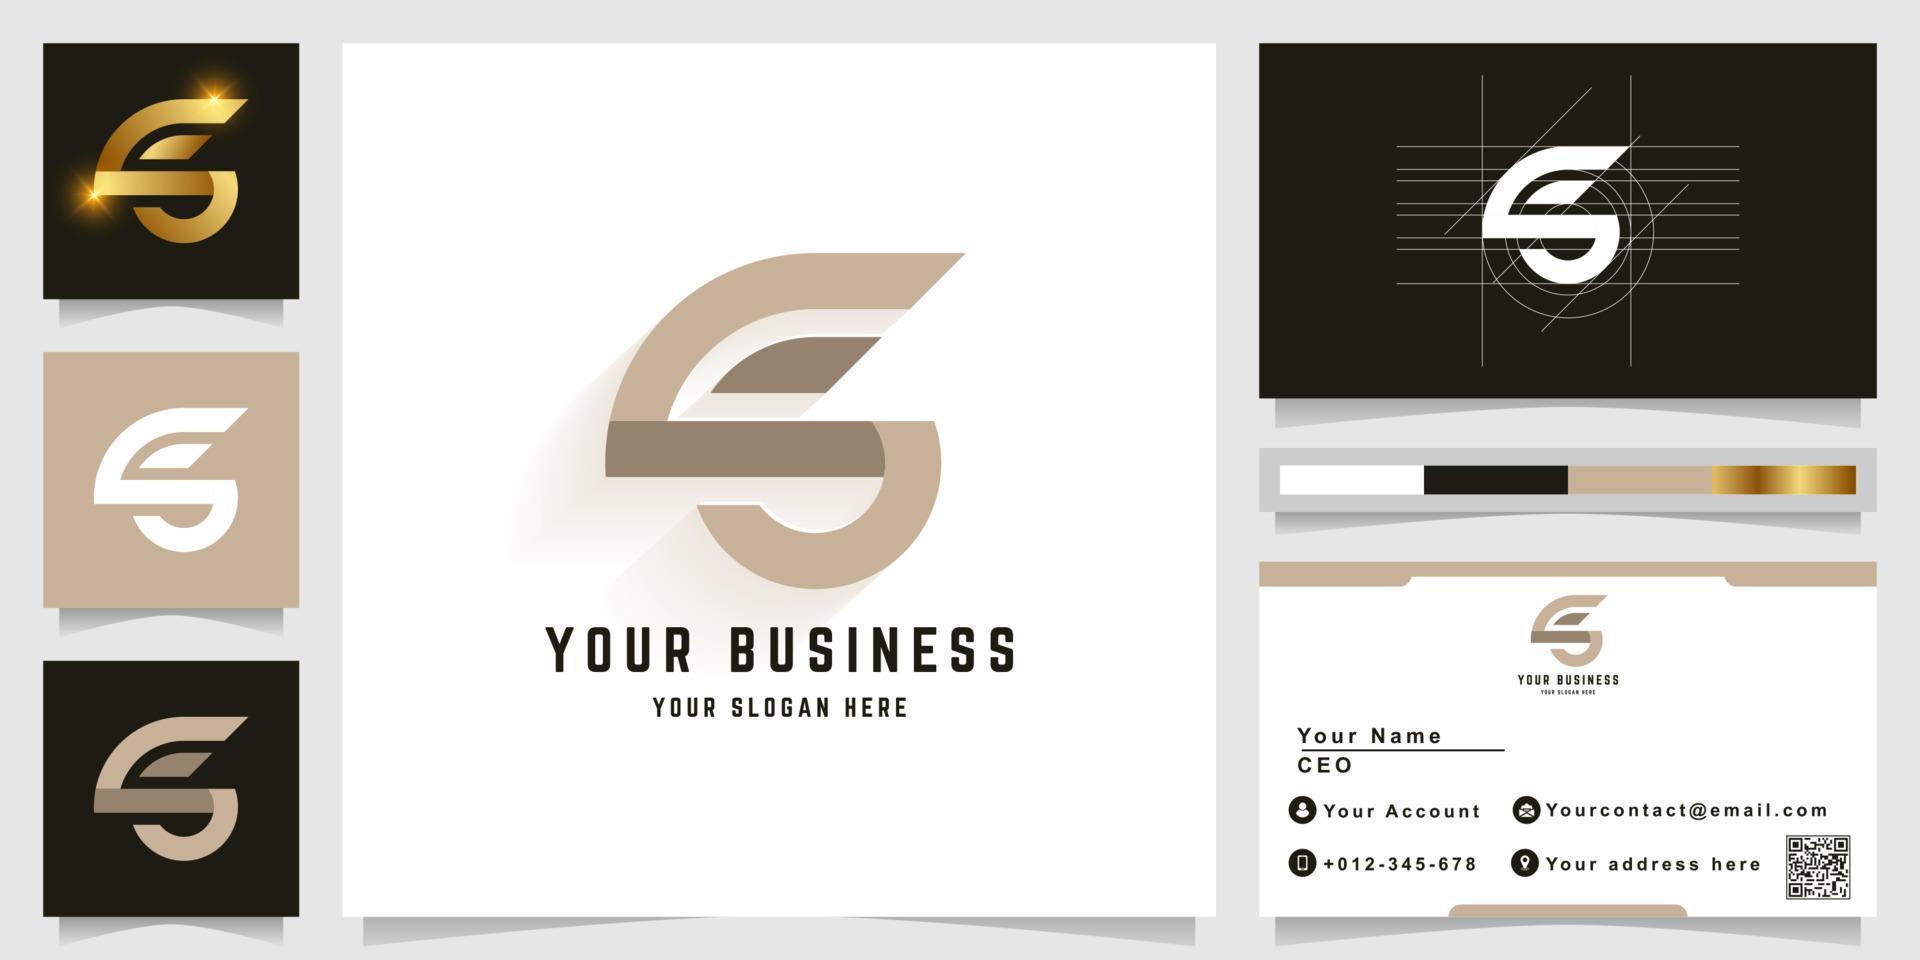 Letter SG or CG monogram logo with business card design vector